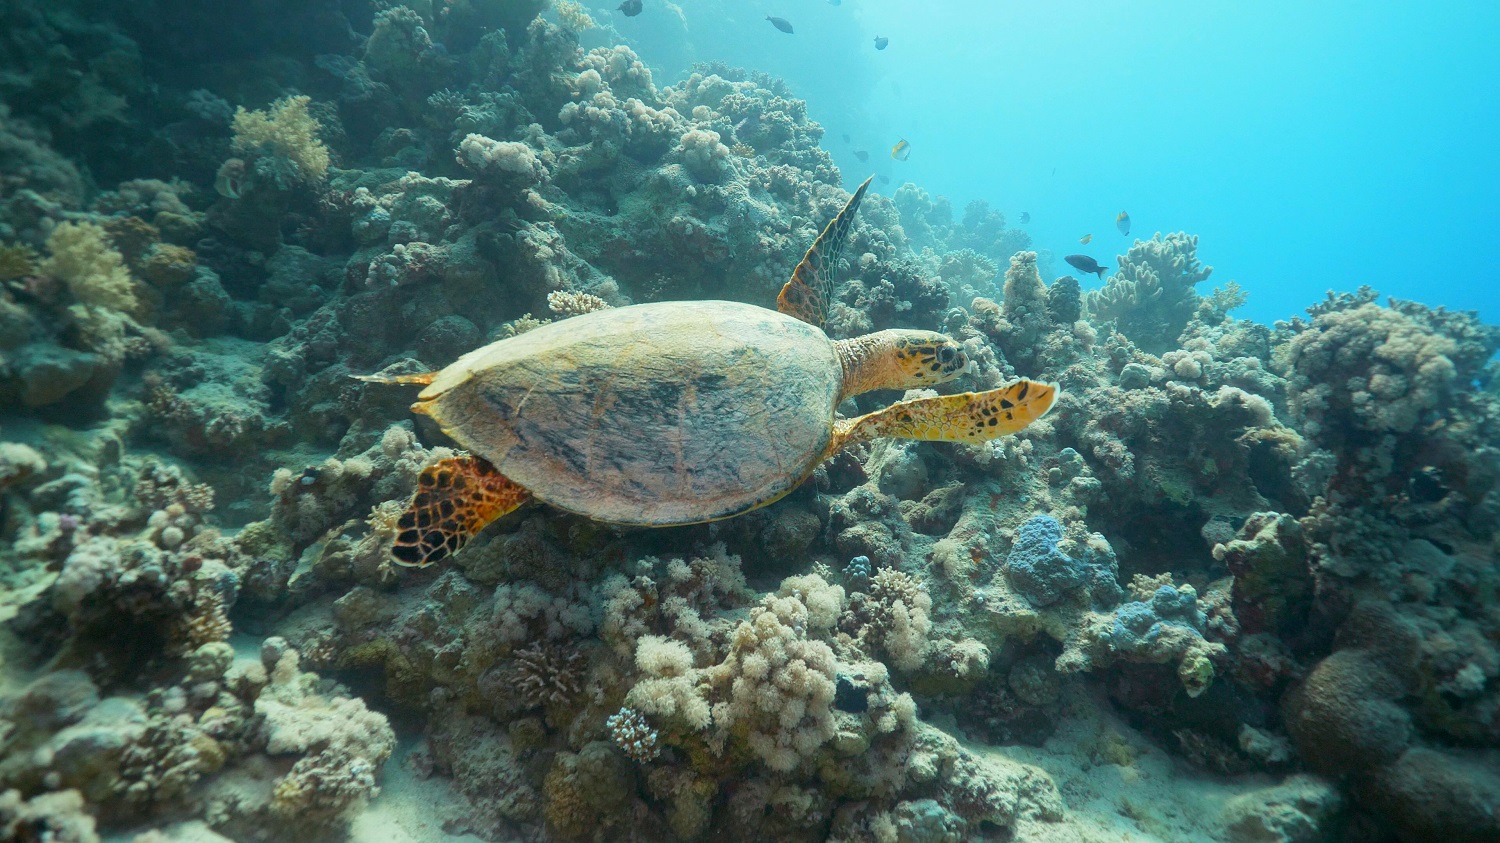 The Red Sea is home to a number of endangered species, including the hawksbill sea turtle. (Image: TRSDC)